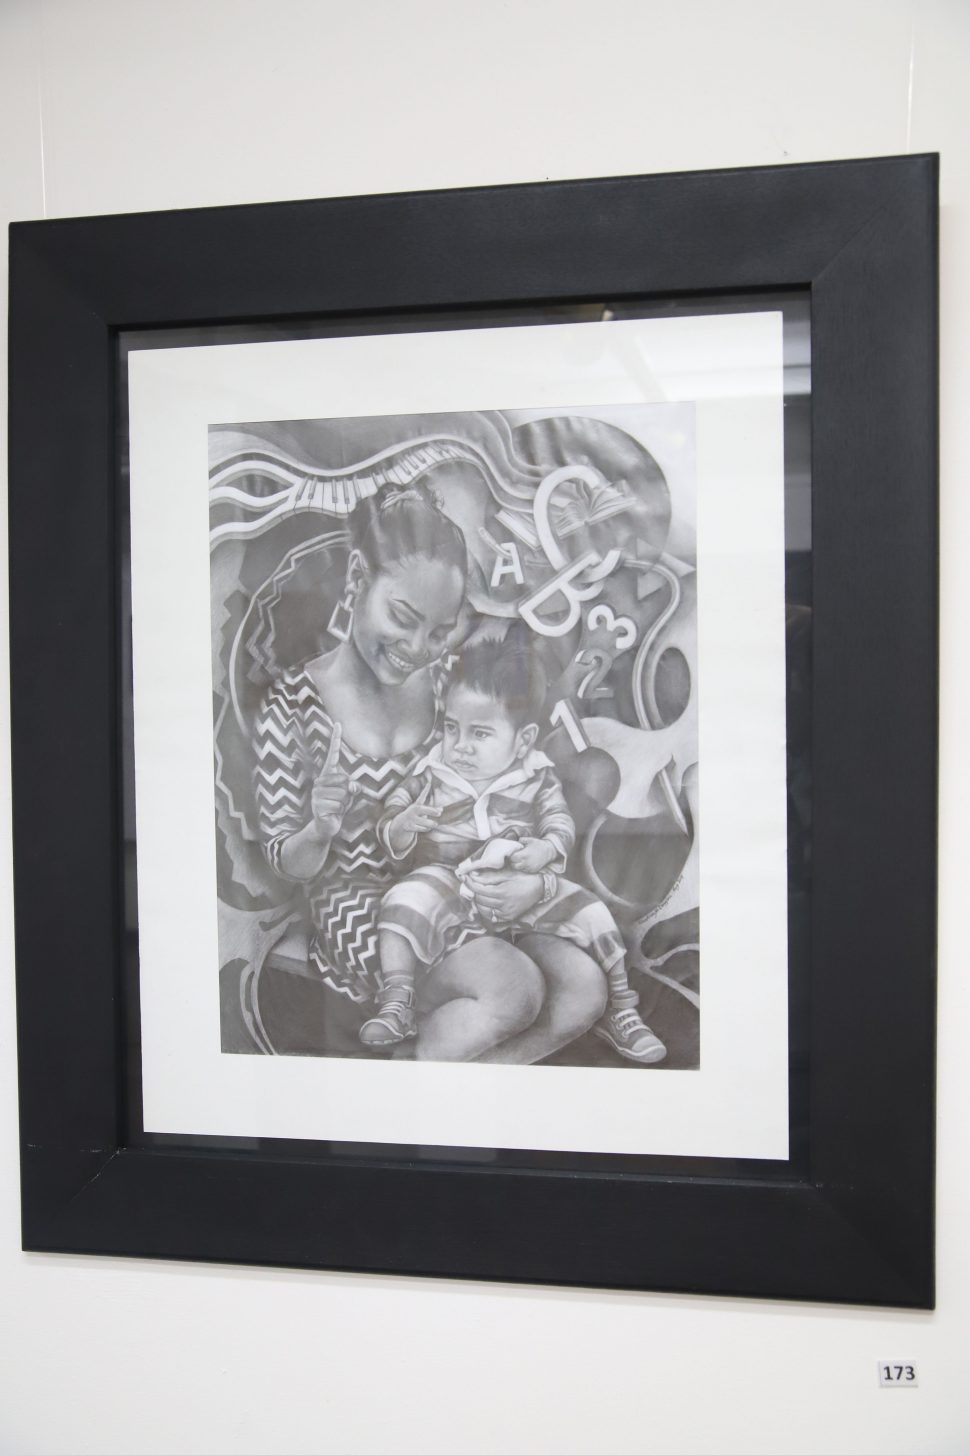 Courtney Douglas’ ‘My First Teacher’ won the Drawing
category. (Terrence Thompson photo)